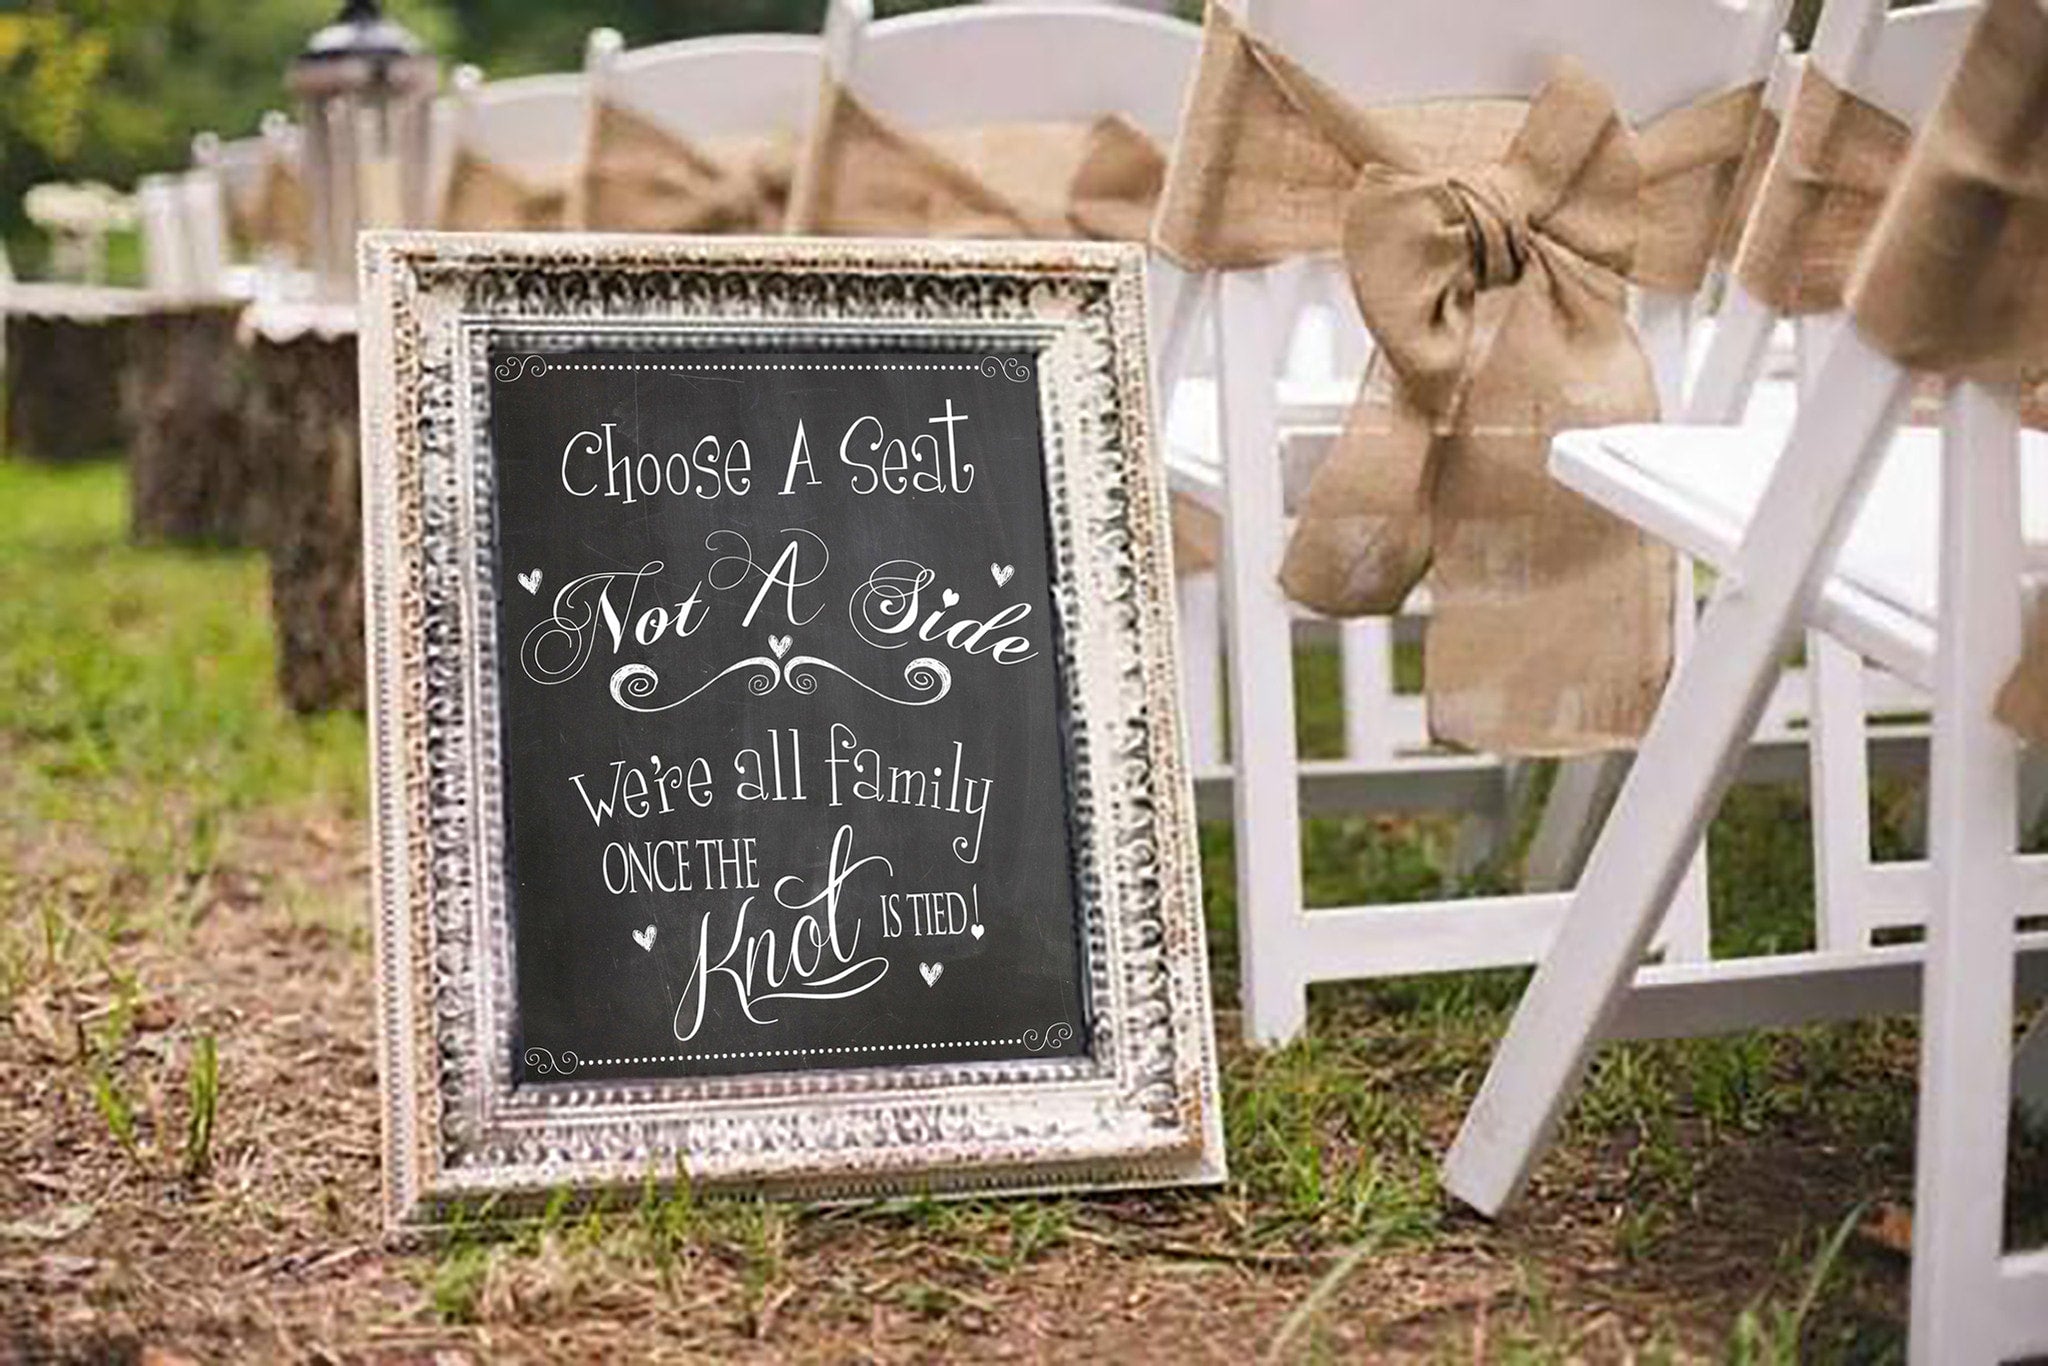 Wedding sign pick a seat not a side Pick a seat wedding